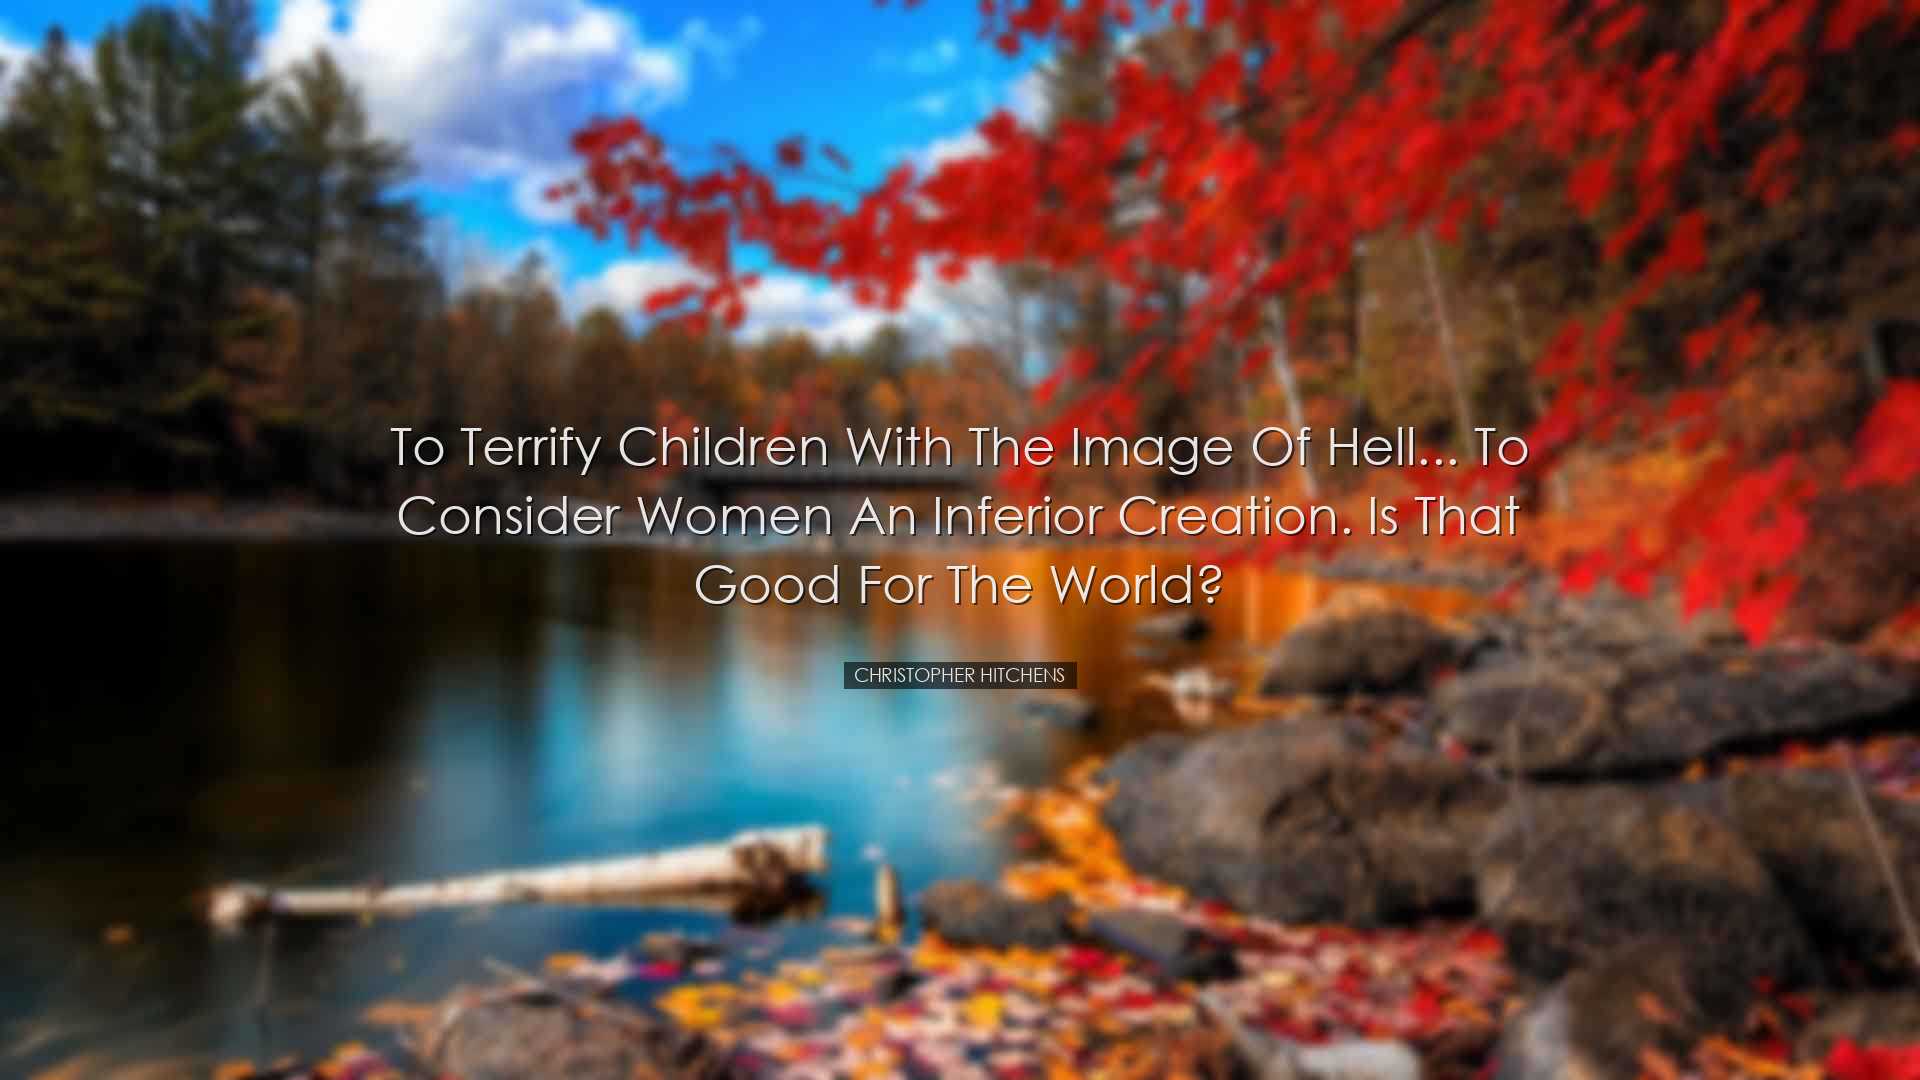 To terrify children with the image of hell... to consider women an